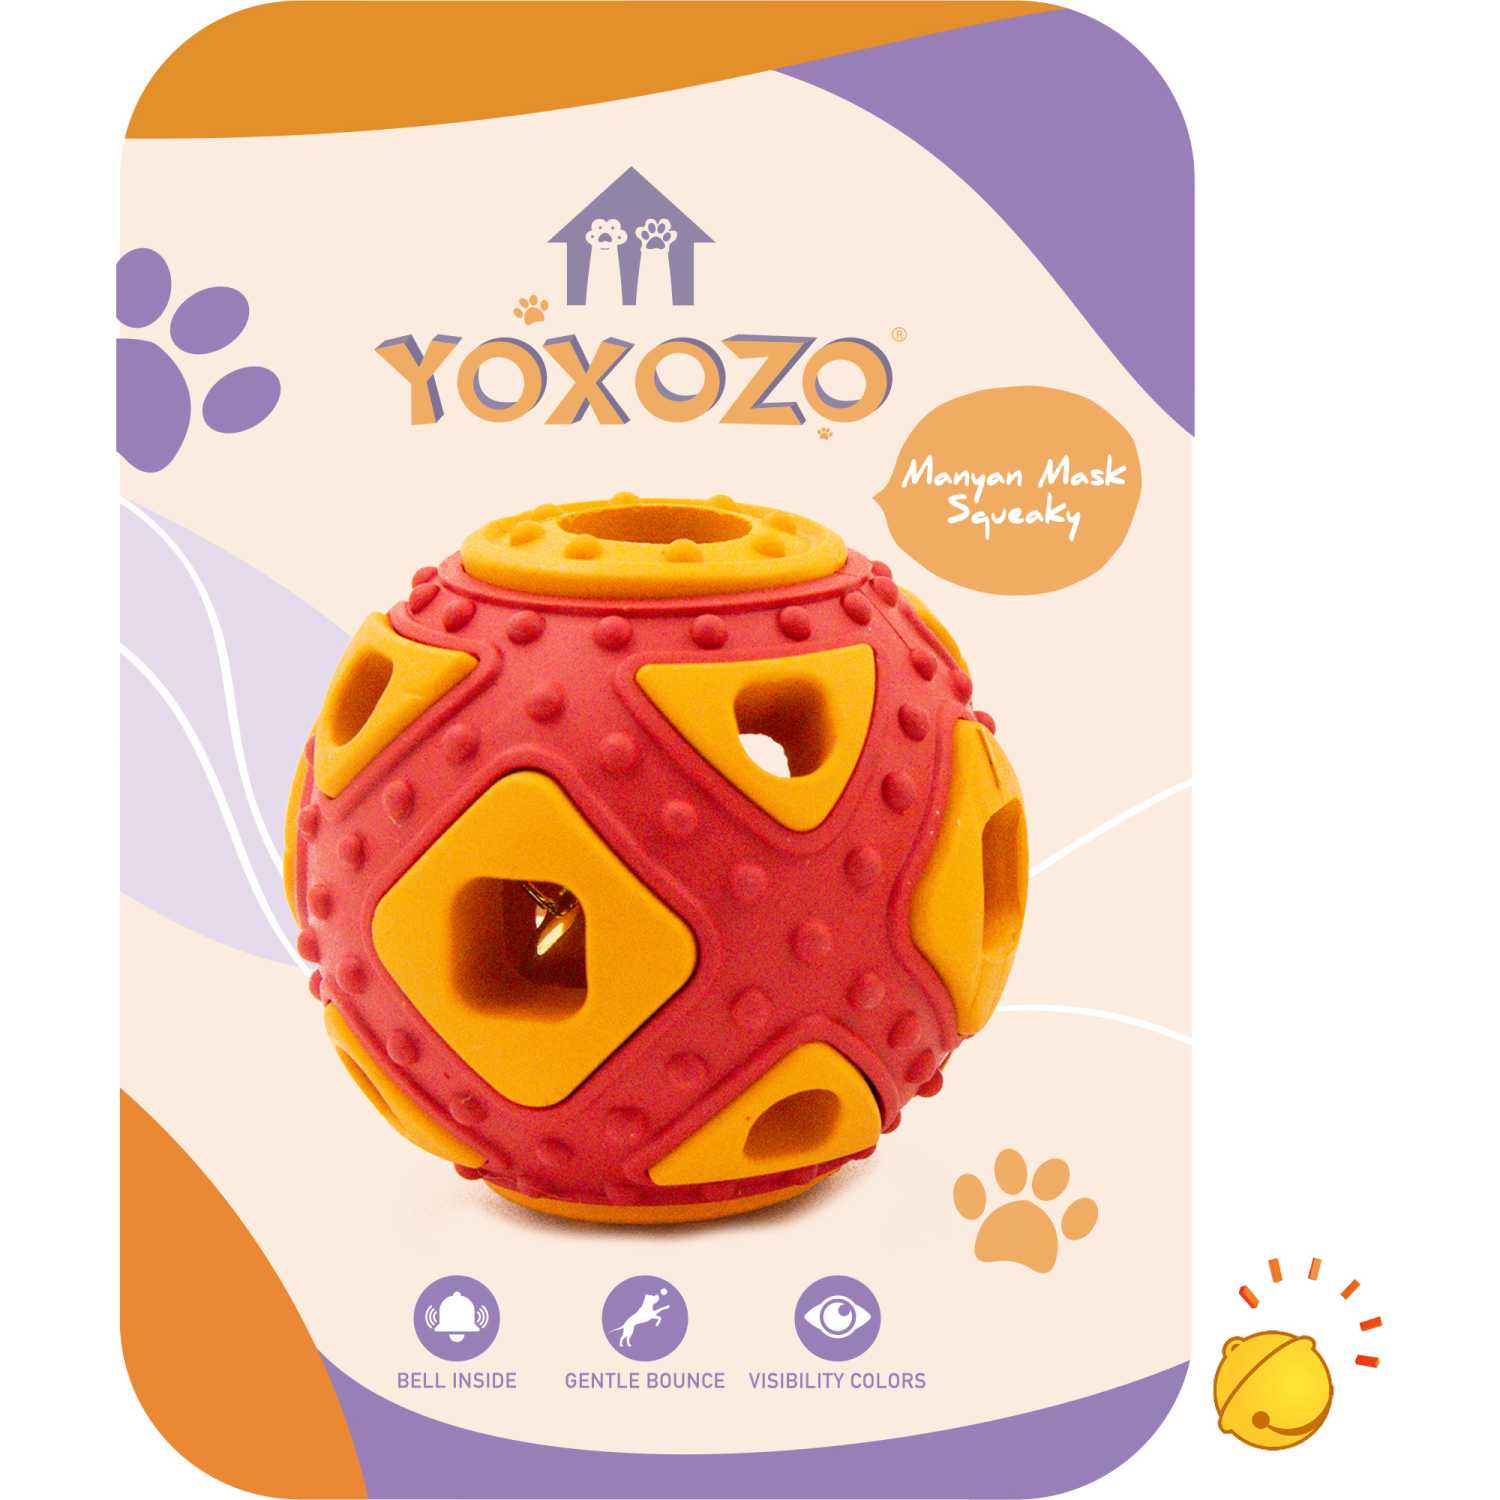 YOXOZO Dog Ball Toy, Jingle Bell Inside for Gift, Rubber Squeaky Toy, Interactive Smart Ball with Holes, Ideal for Puppies, Small, Medium and Blind Dogs, 2.5 Inch (RED Orange)